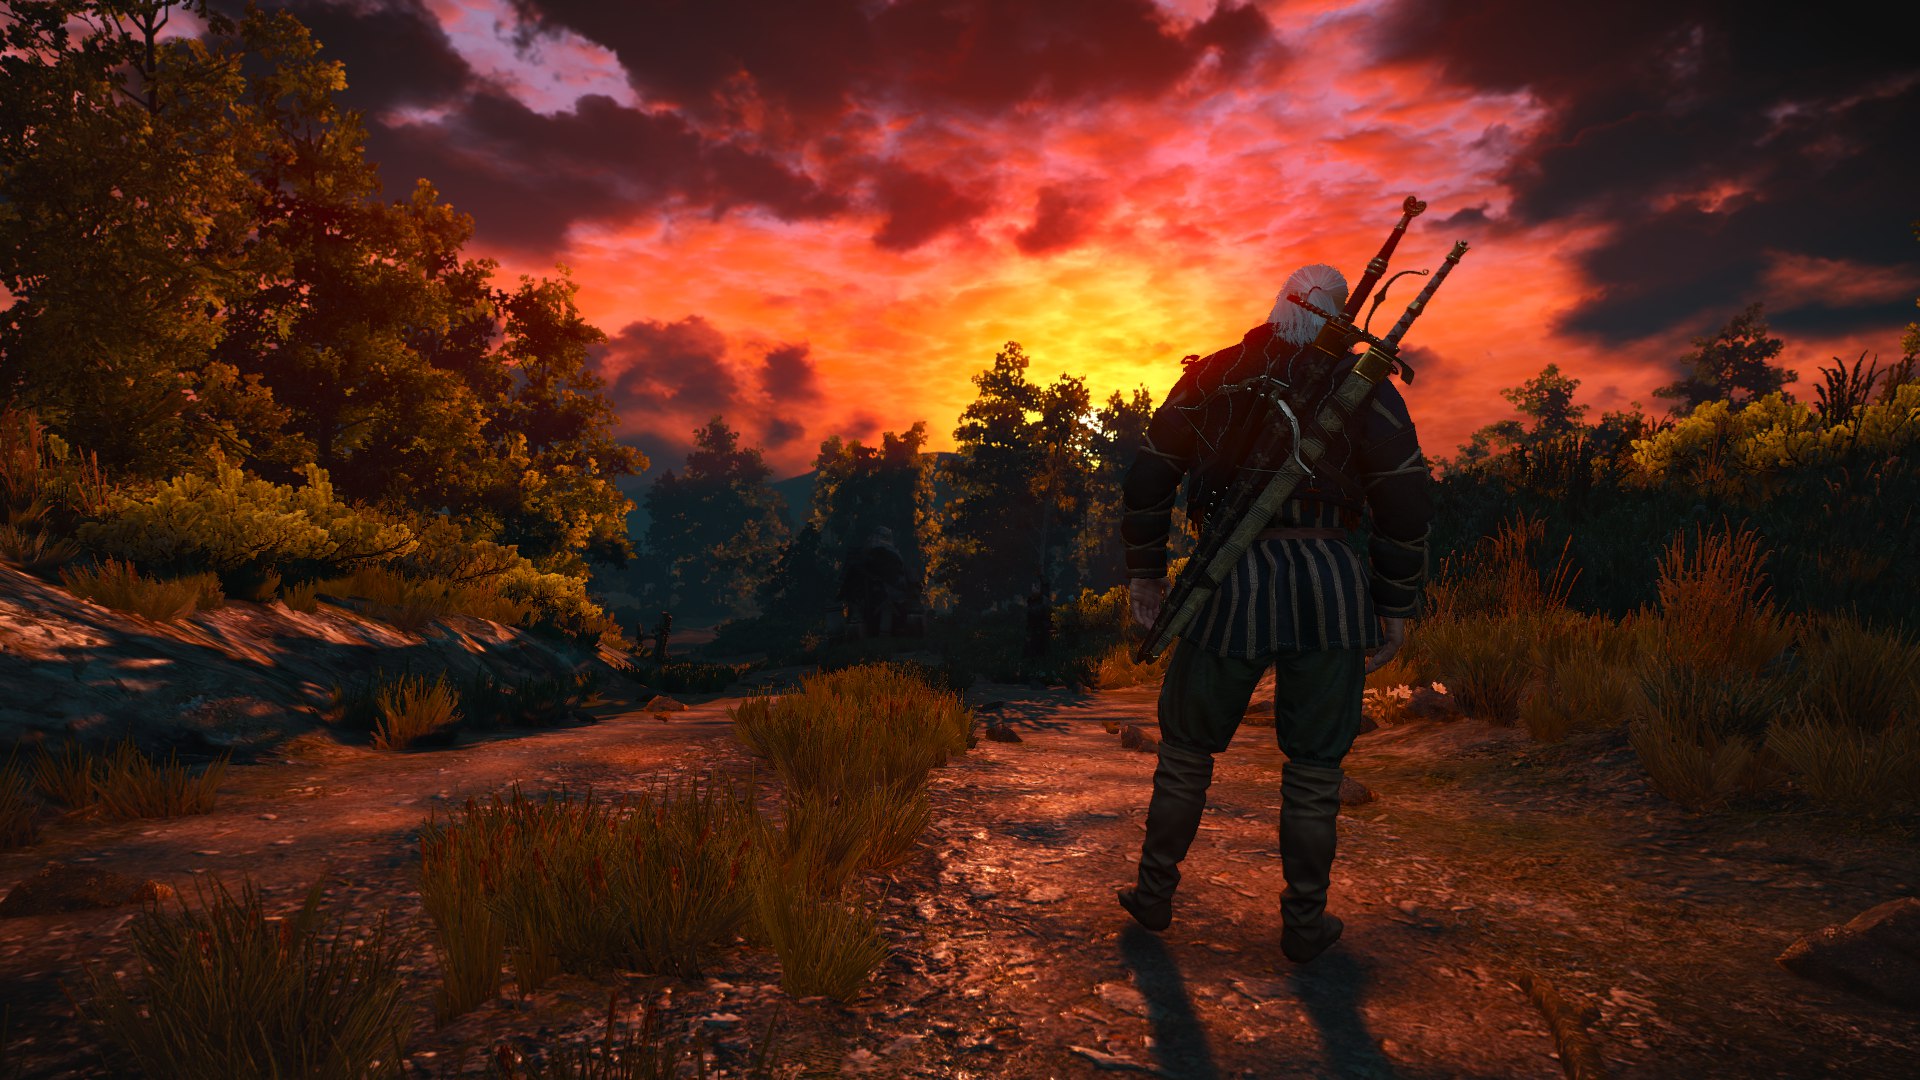 General 1920x1080 The Witcher landscape video game art Nvidia The Witcher 3: Wild Hunt Geralt of Rivia